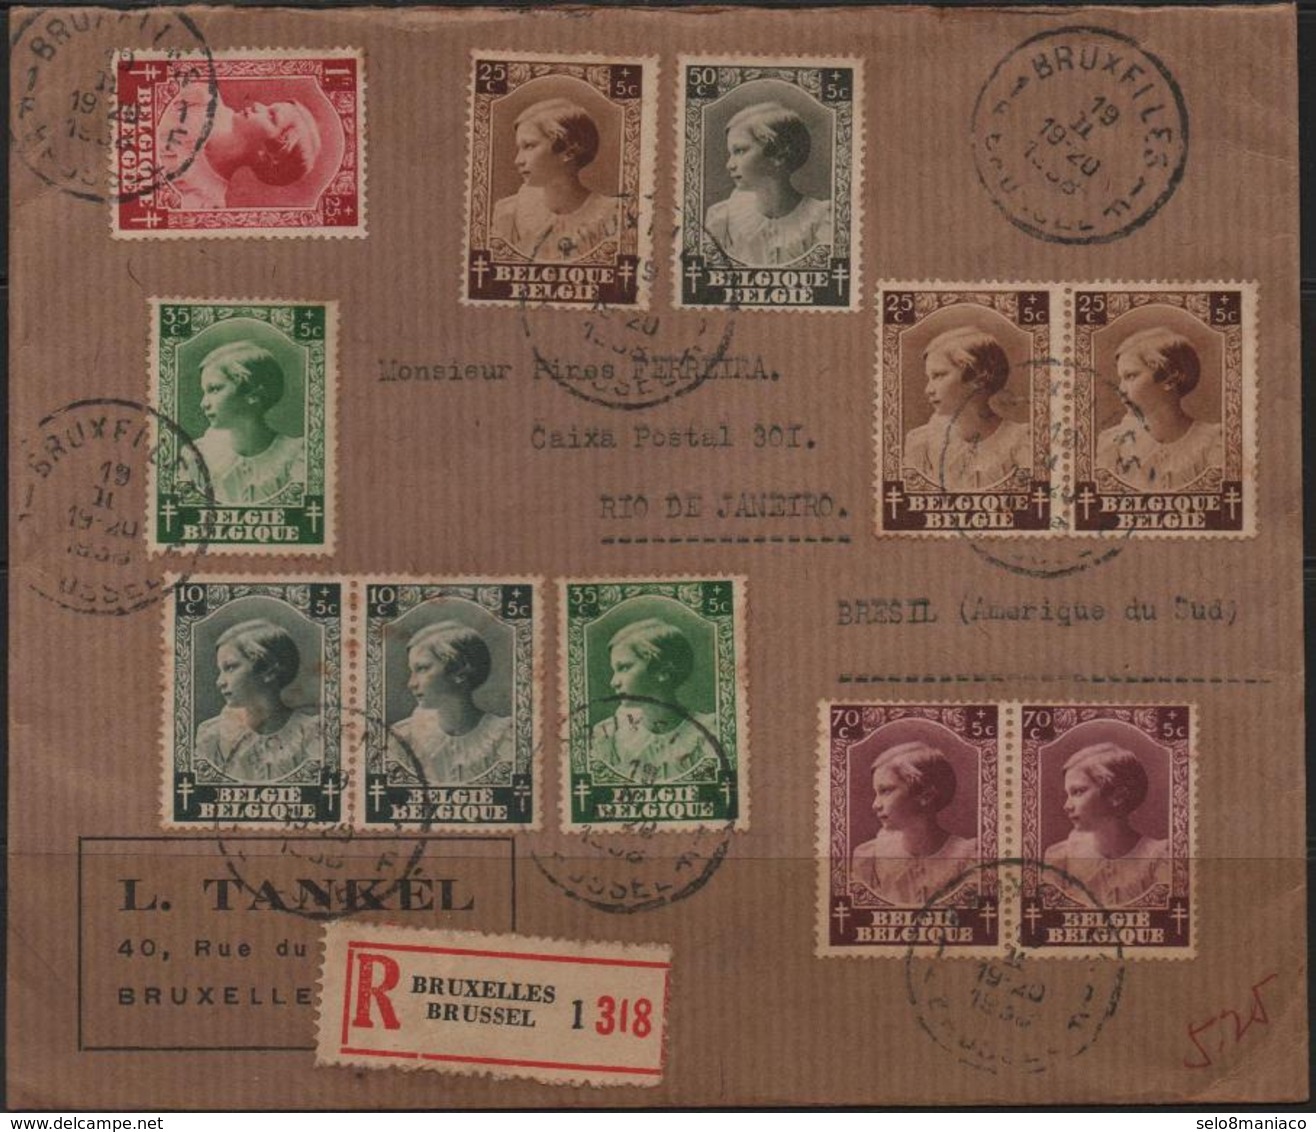 C3487-Belgium-Registered Manila Cover From Brussels To Rio, Brazil-1938 - Covers & Documents